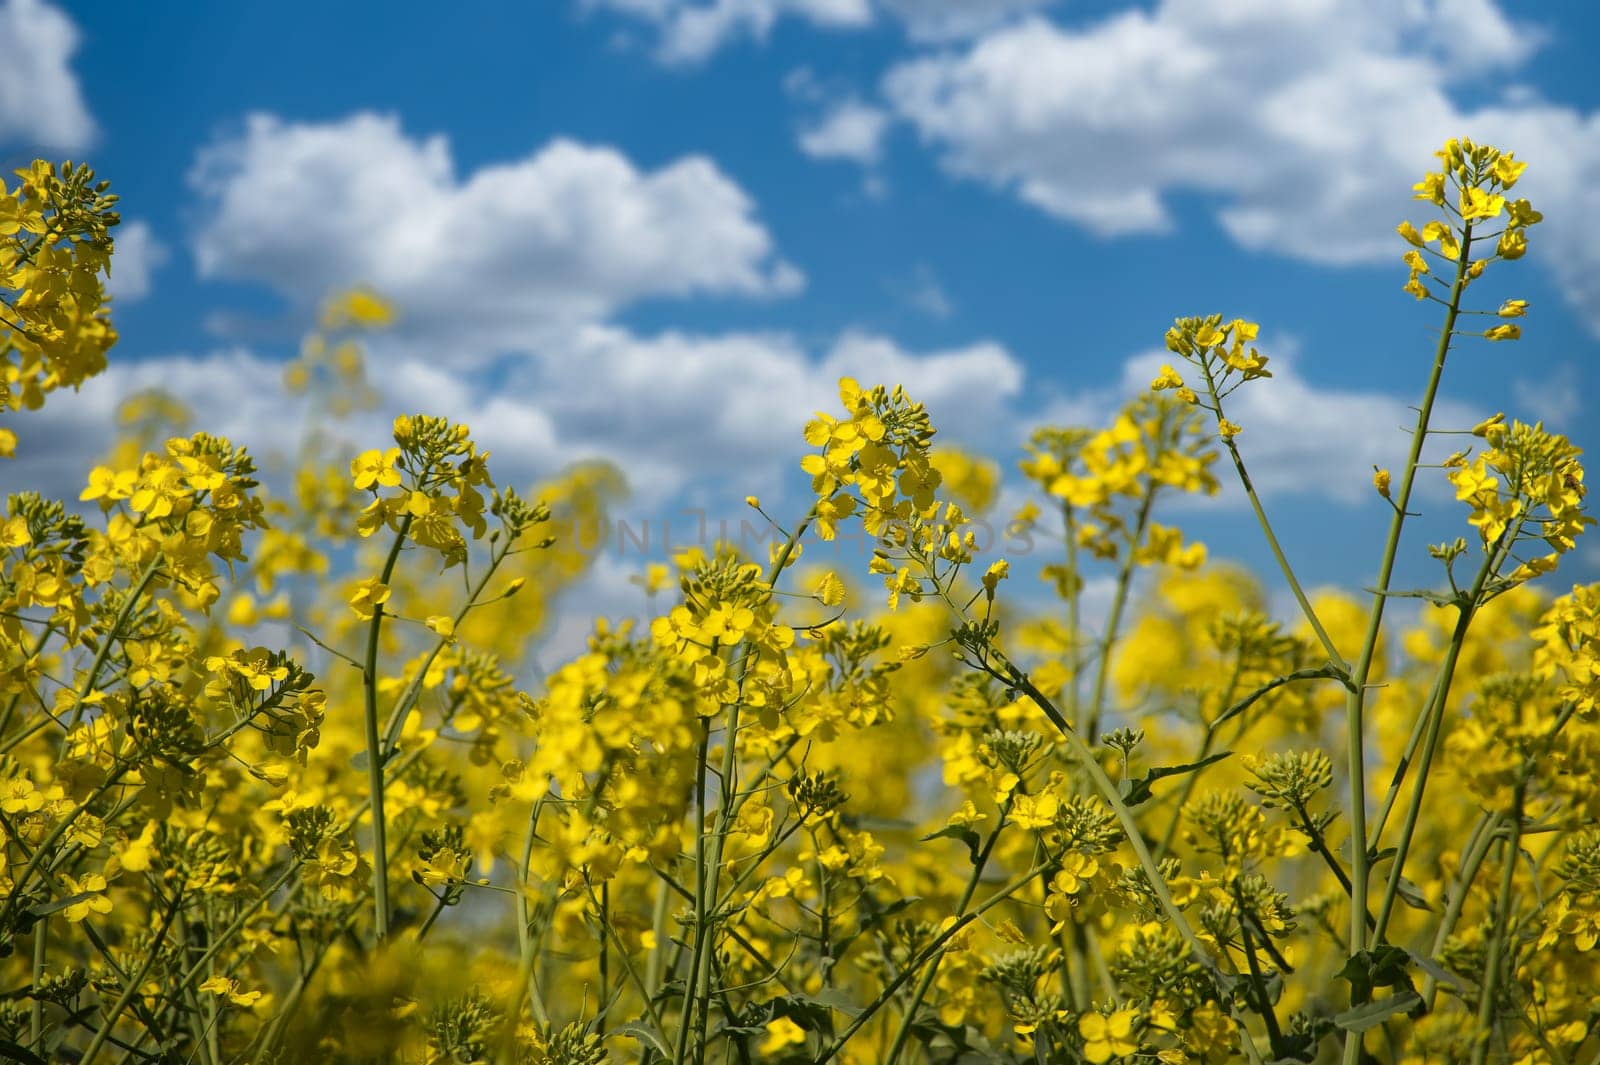 The vibrant yellow color of the canola plants flowers stands out against the blue of the sky and against the green of the surrounding vegetation, flowers are seen up close